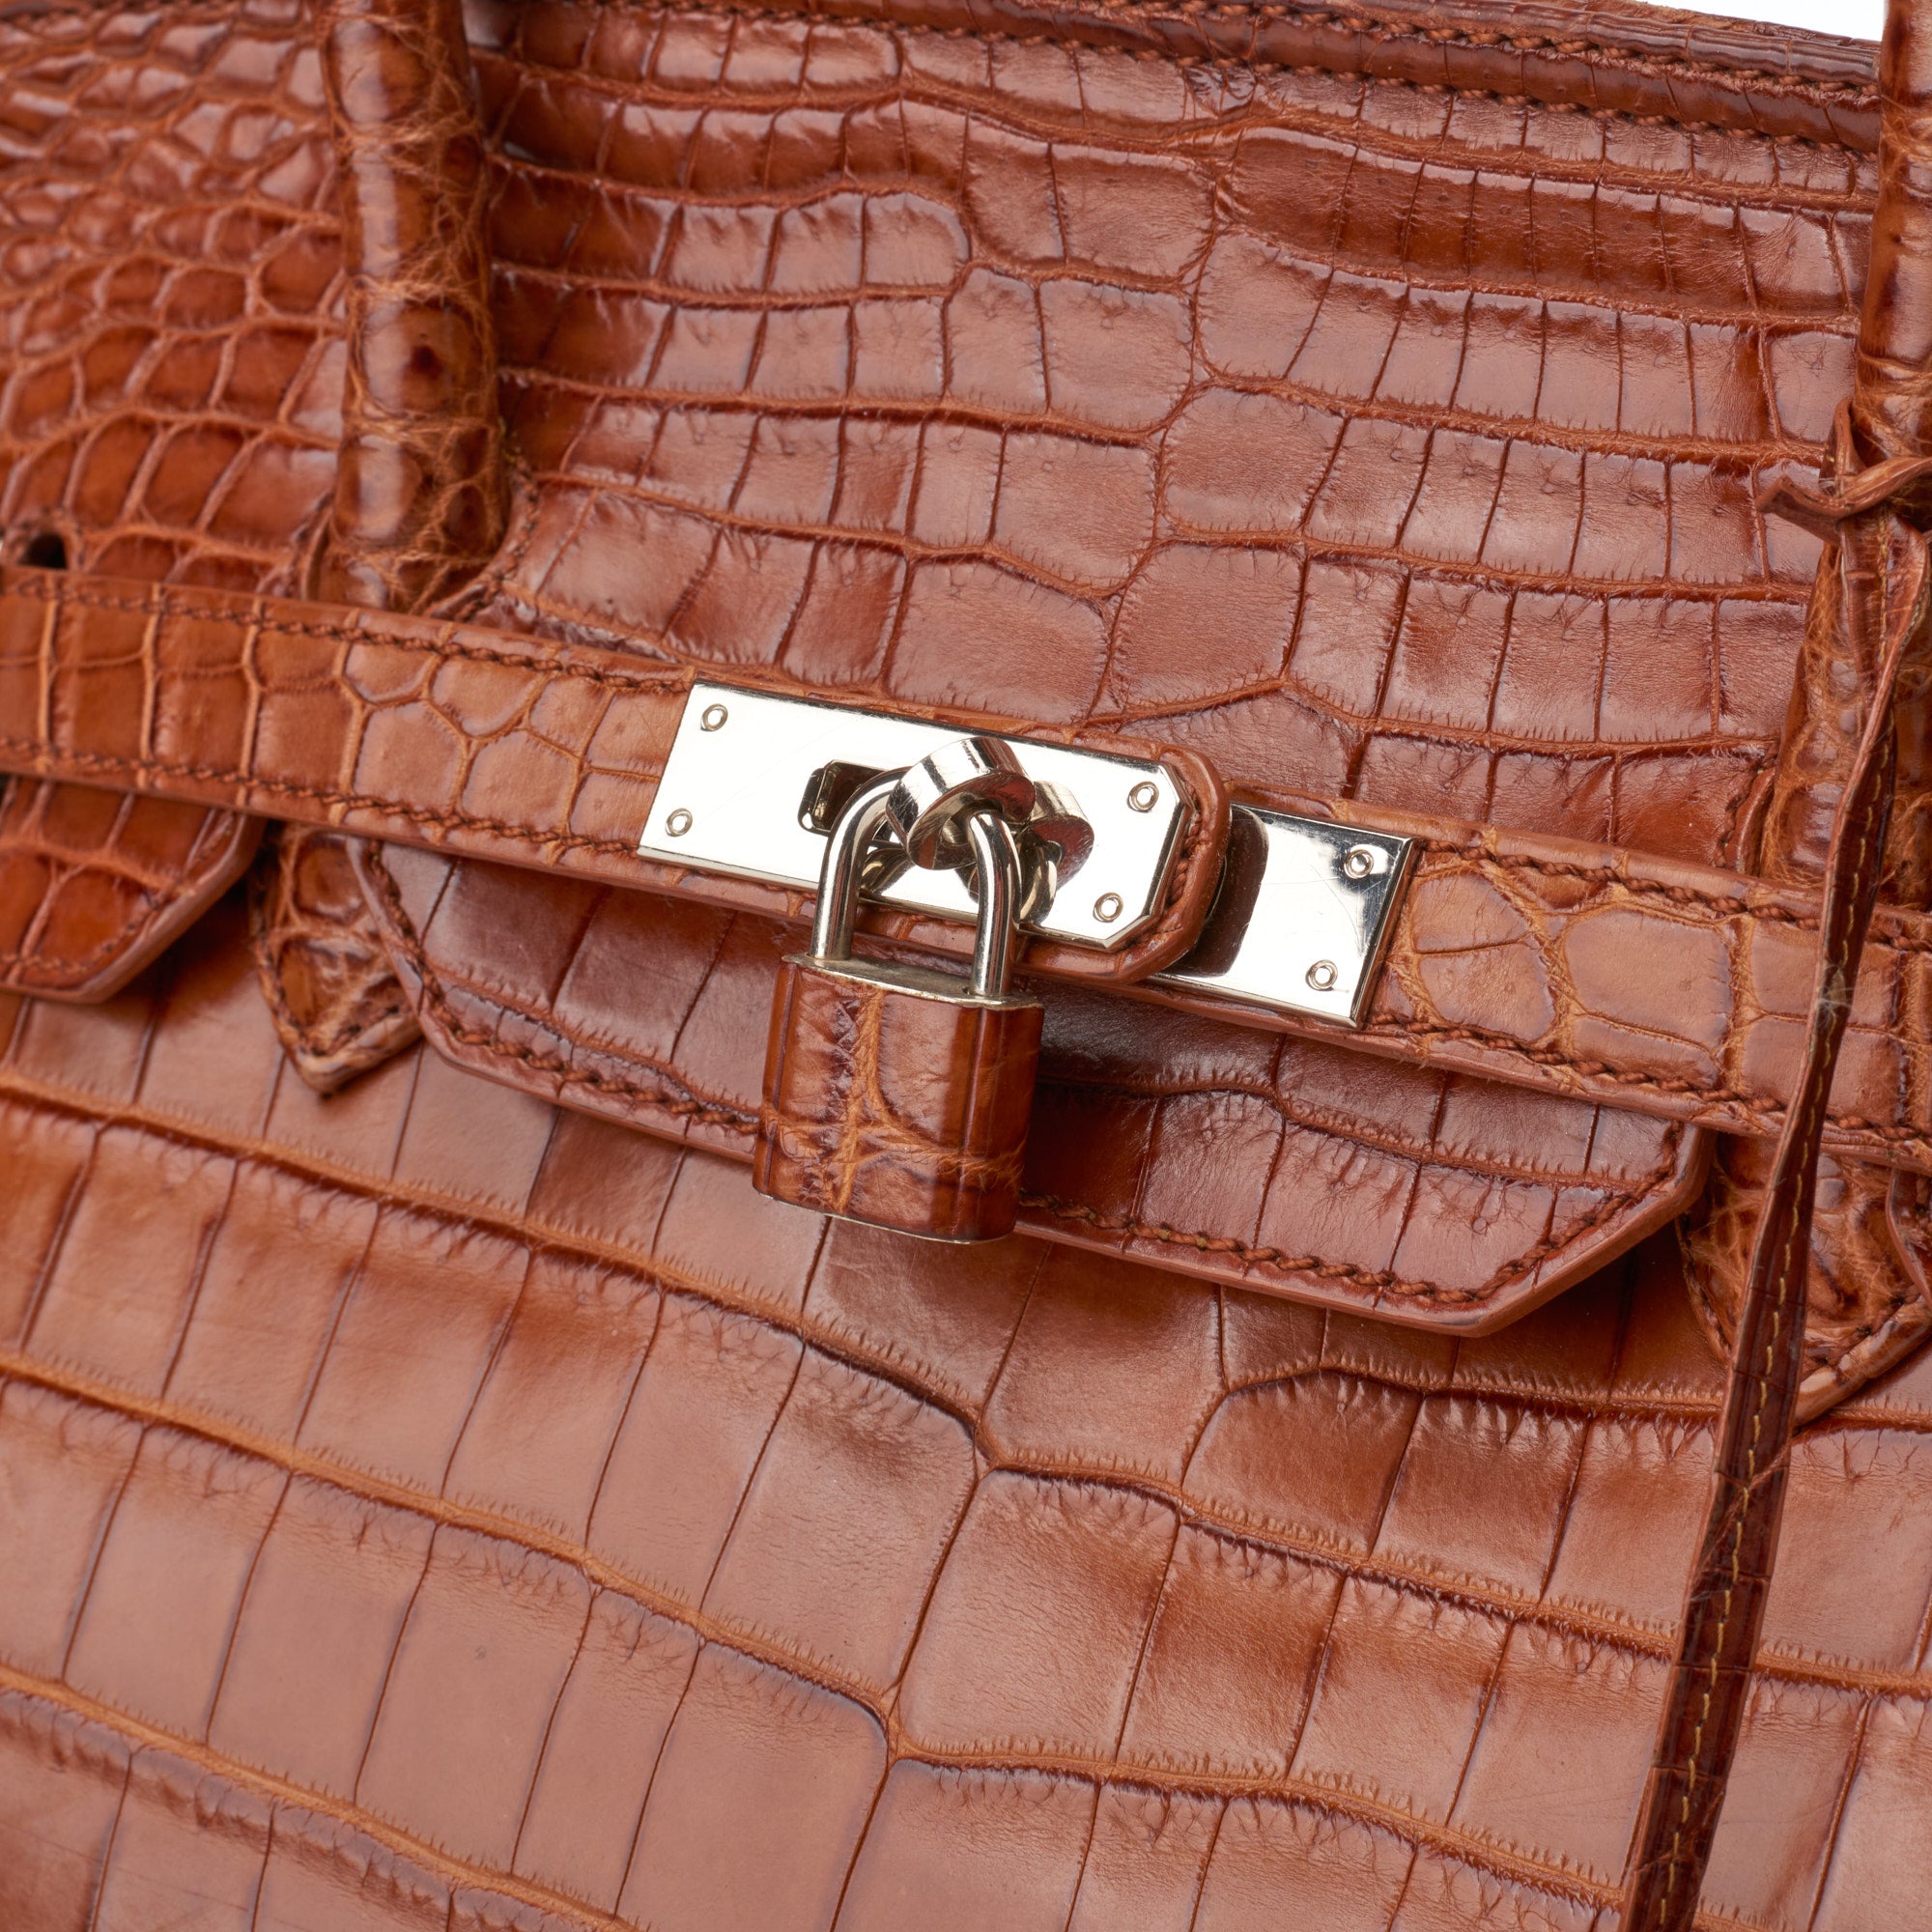 Barenia Leather: One Of The Rarest Leather Types In The World